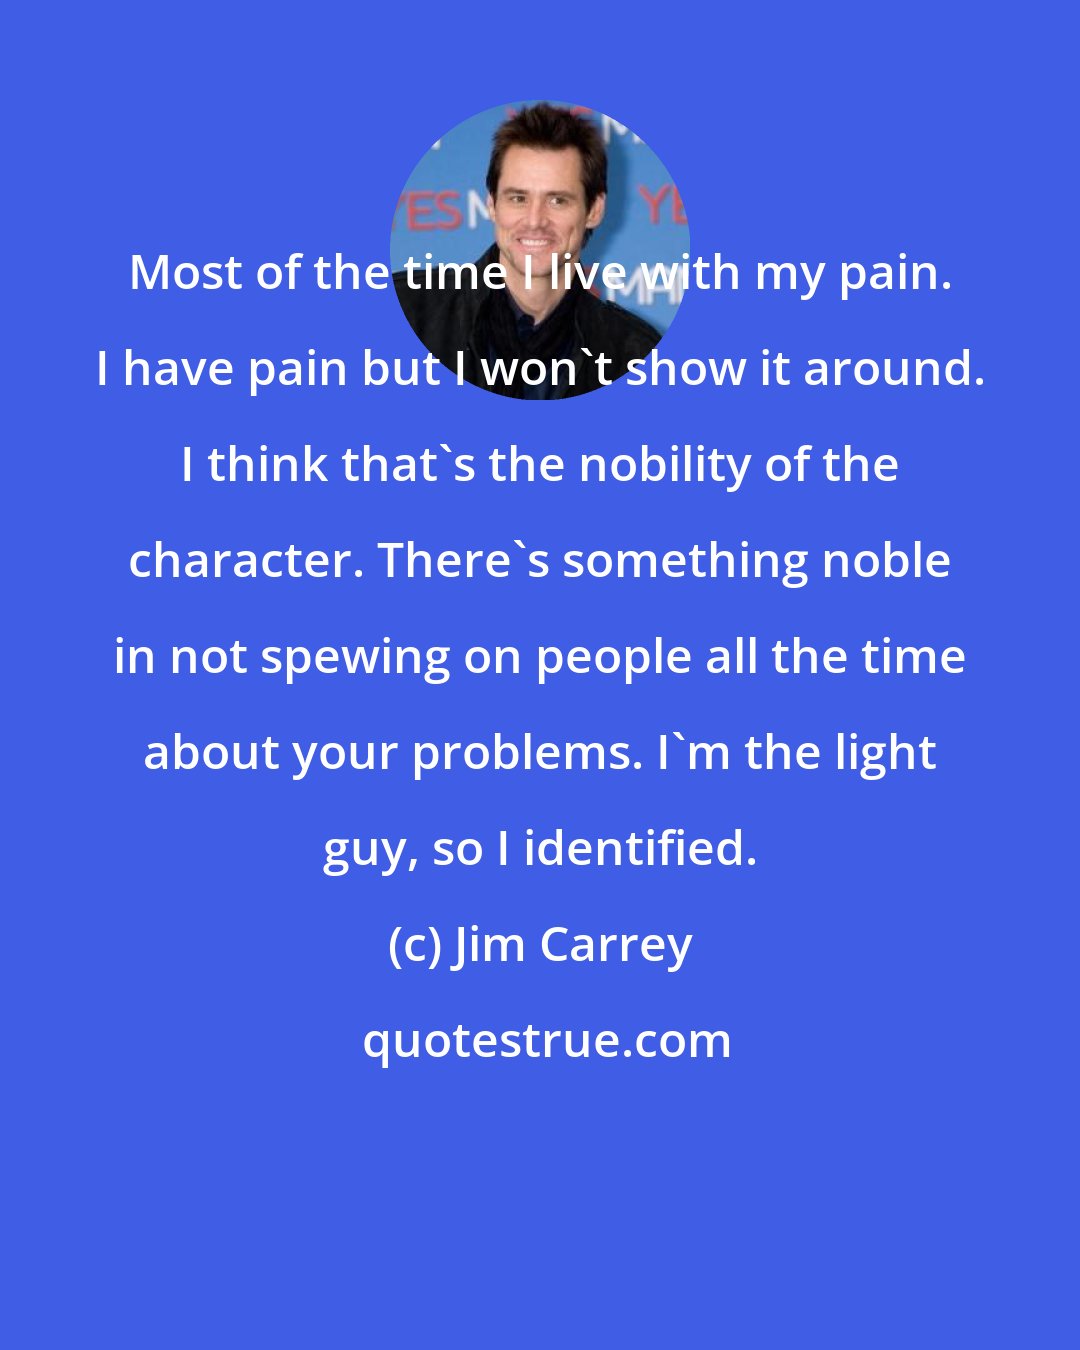 Jim Carrey: Most of the time I live with my pain. I have pain but I won't show it around. I think that's the nobility of the character. There's something noble in not spewing on people all the time about your problems. I'm the light guy, so I identified.